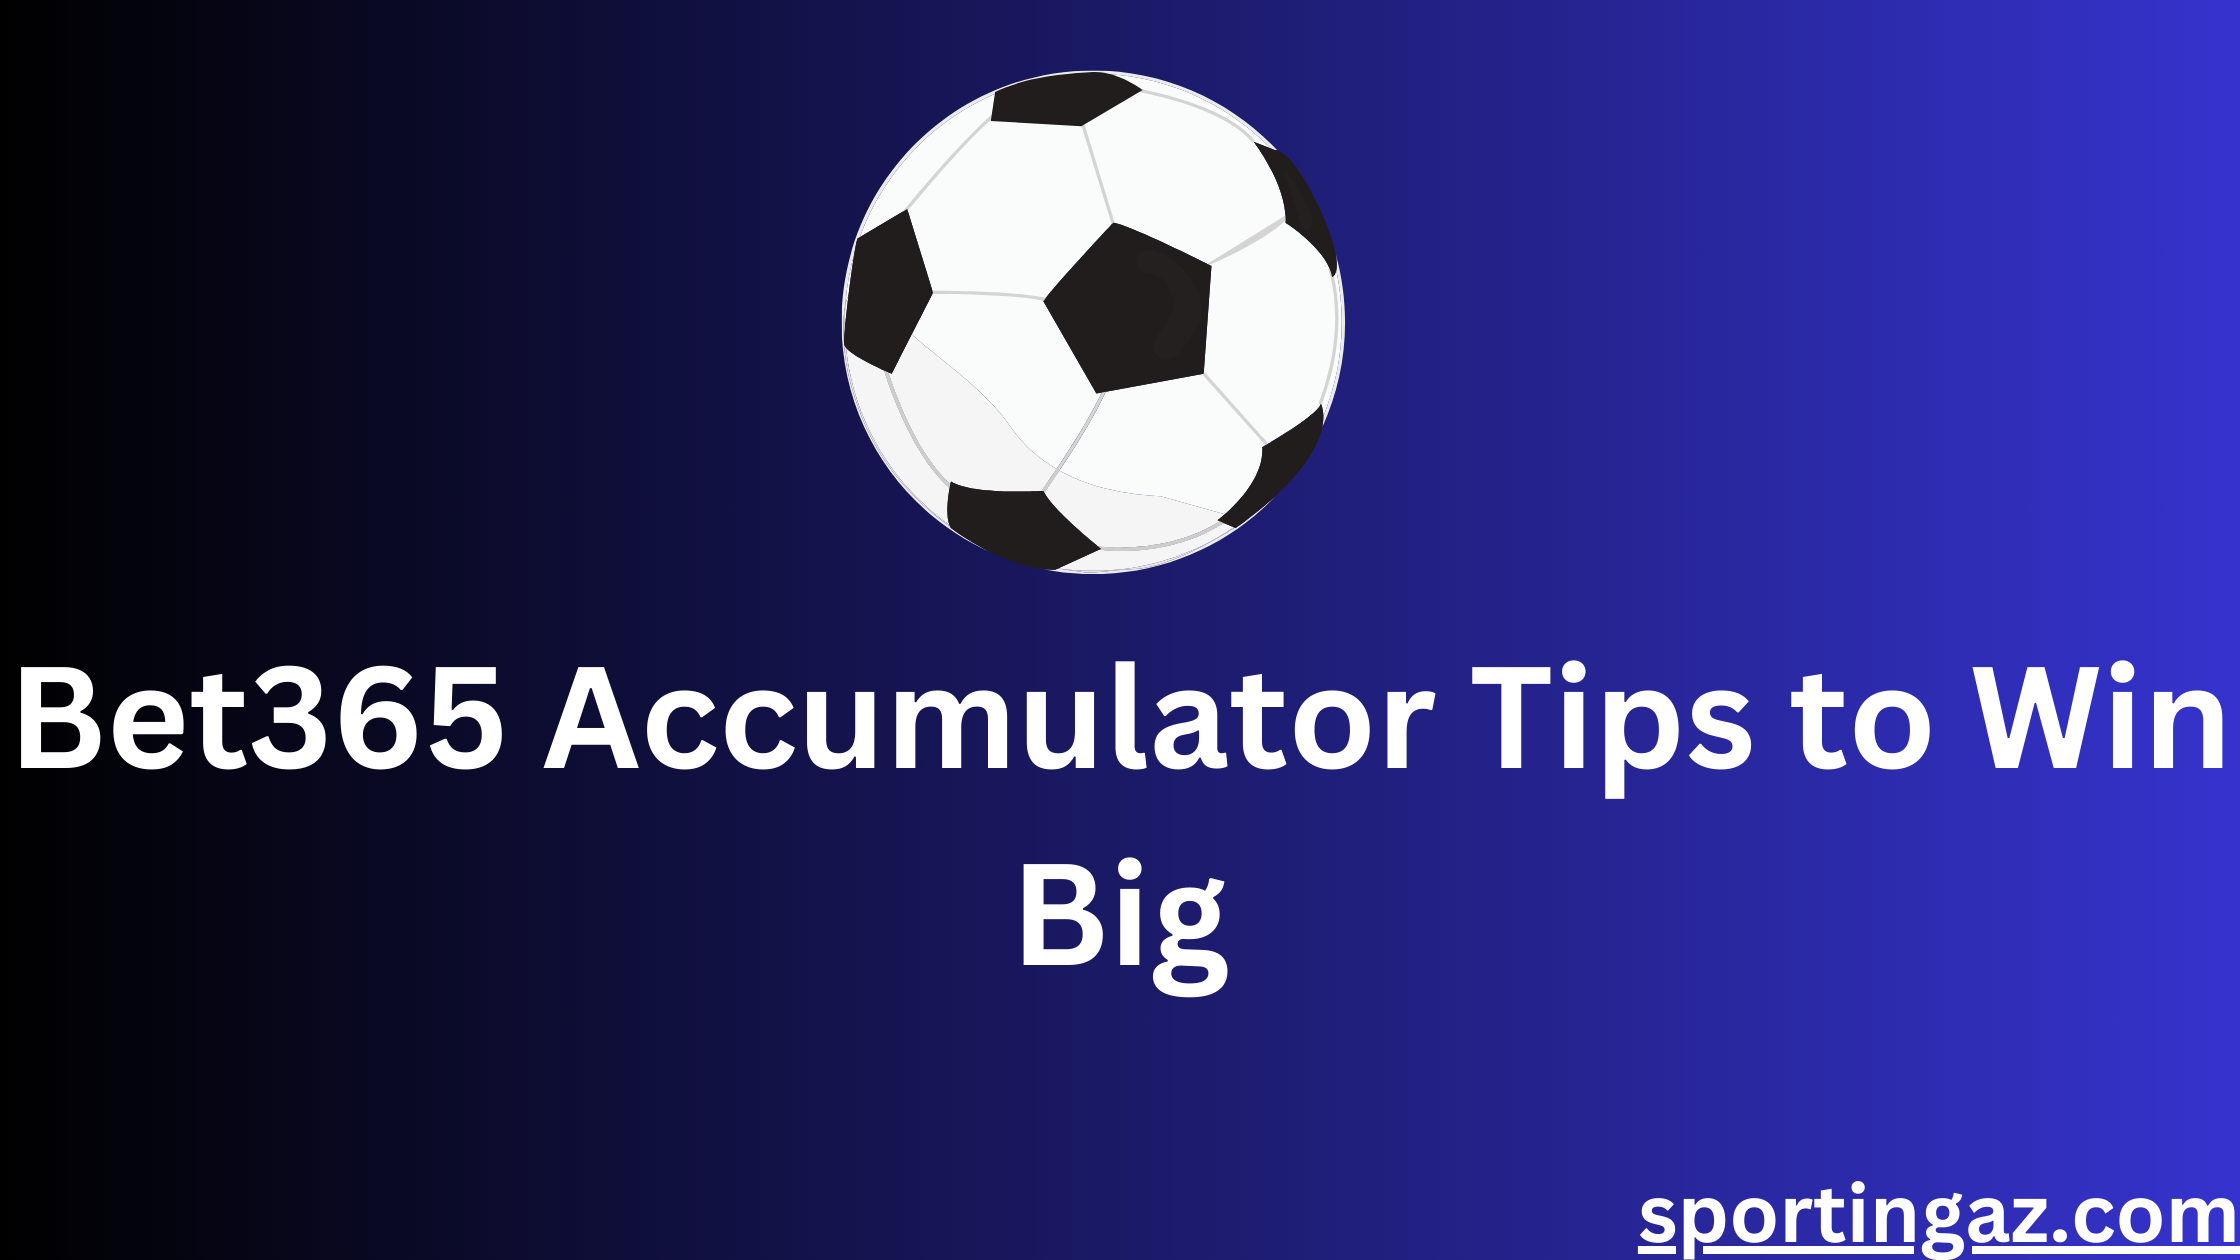 Both Teams To Score & Win Betting Tips - Accumulator Tips